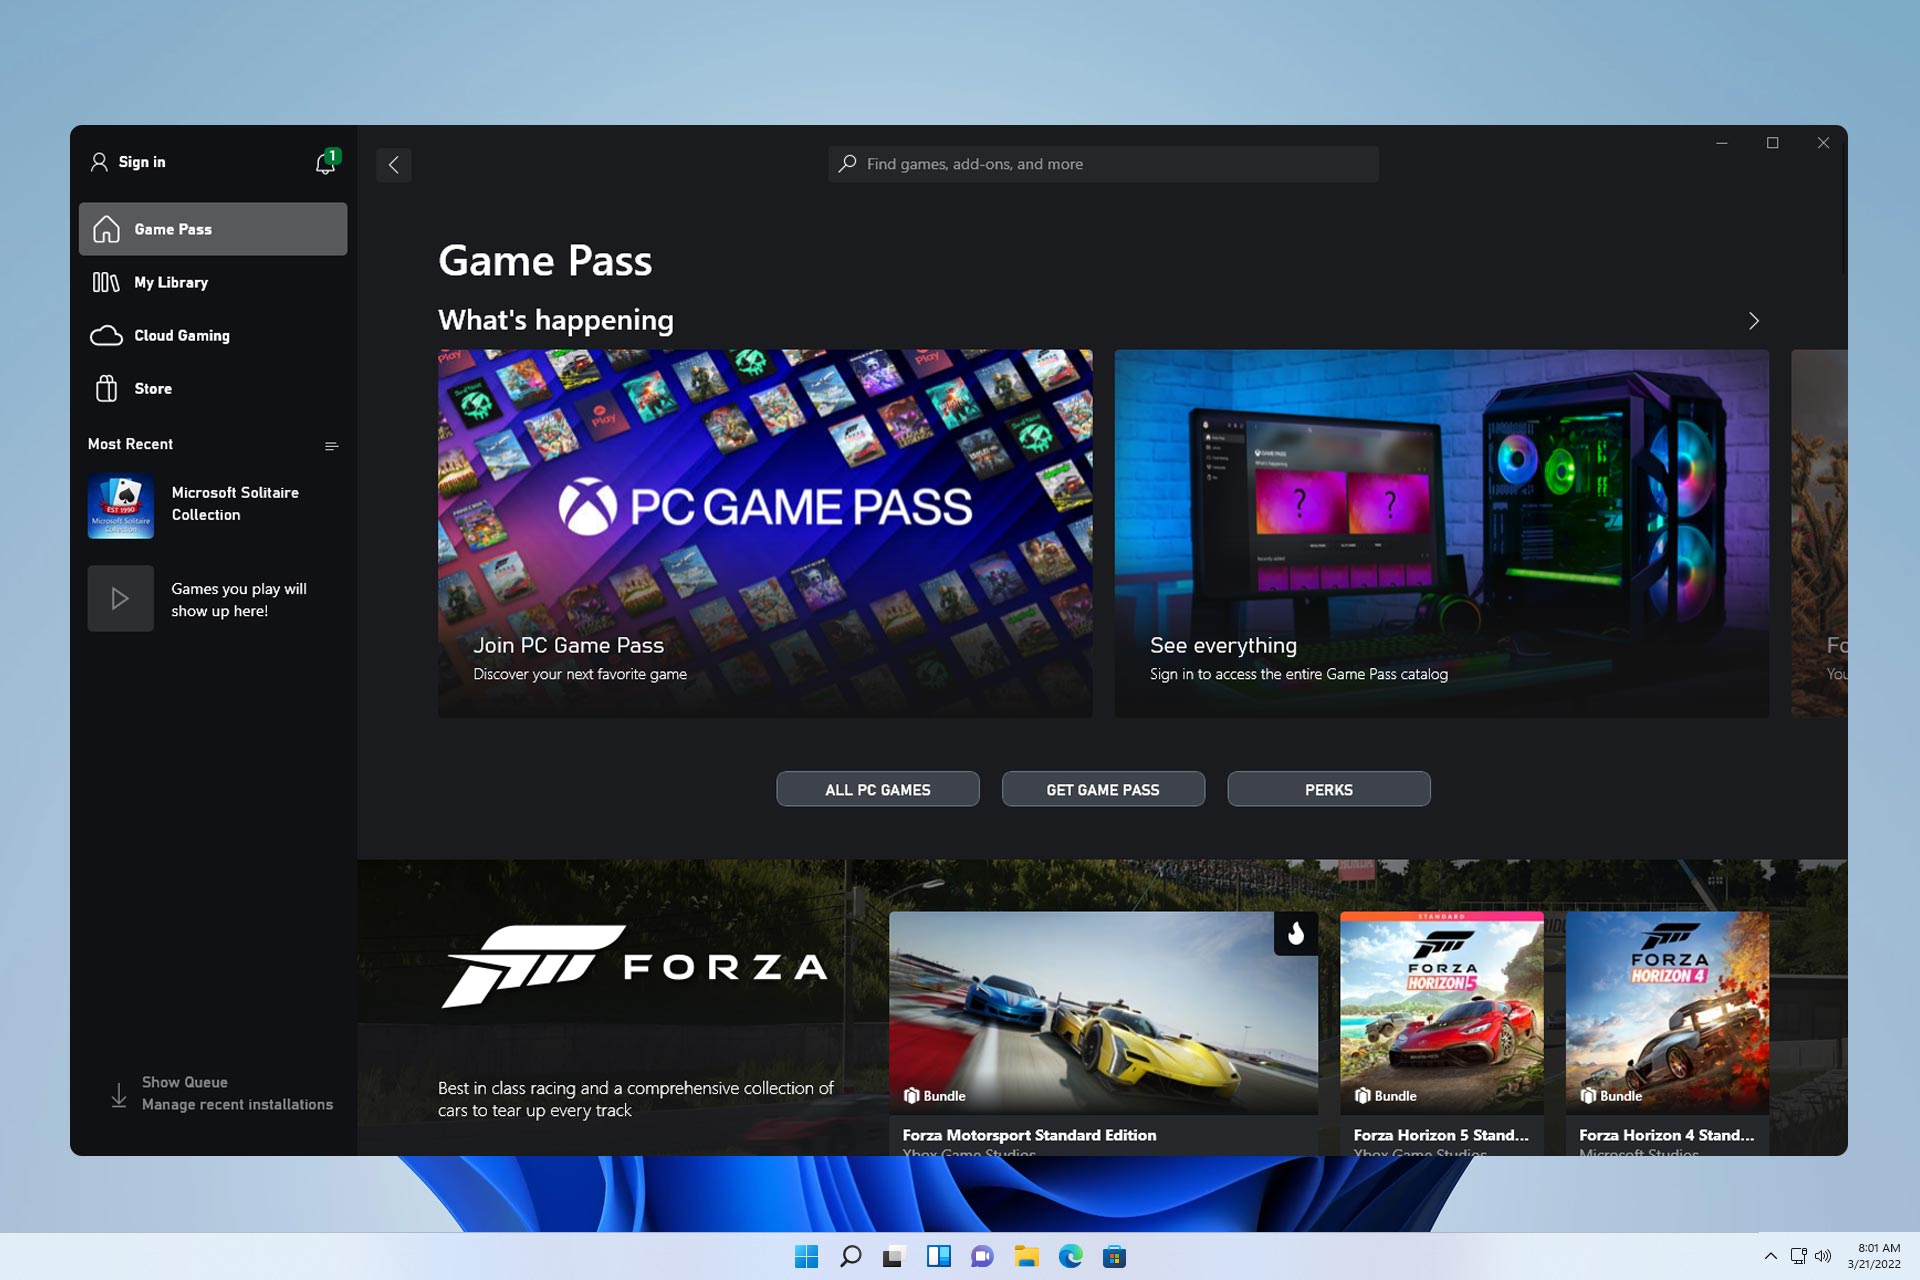 Xbox Game Pass PC games: Every game in Microsoft's subscription